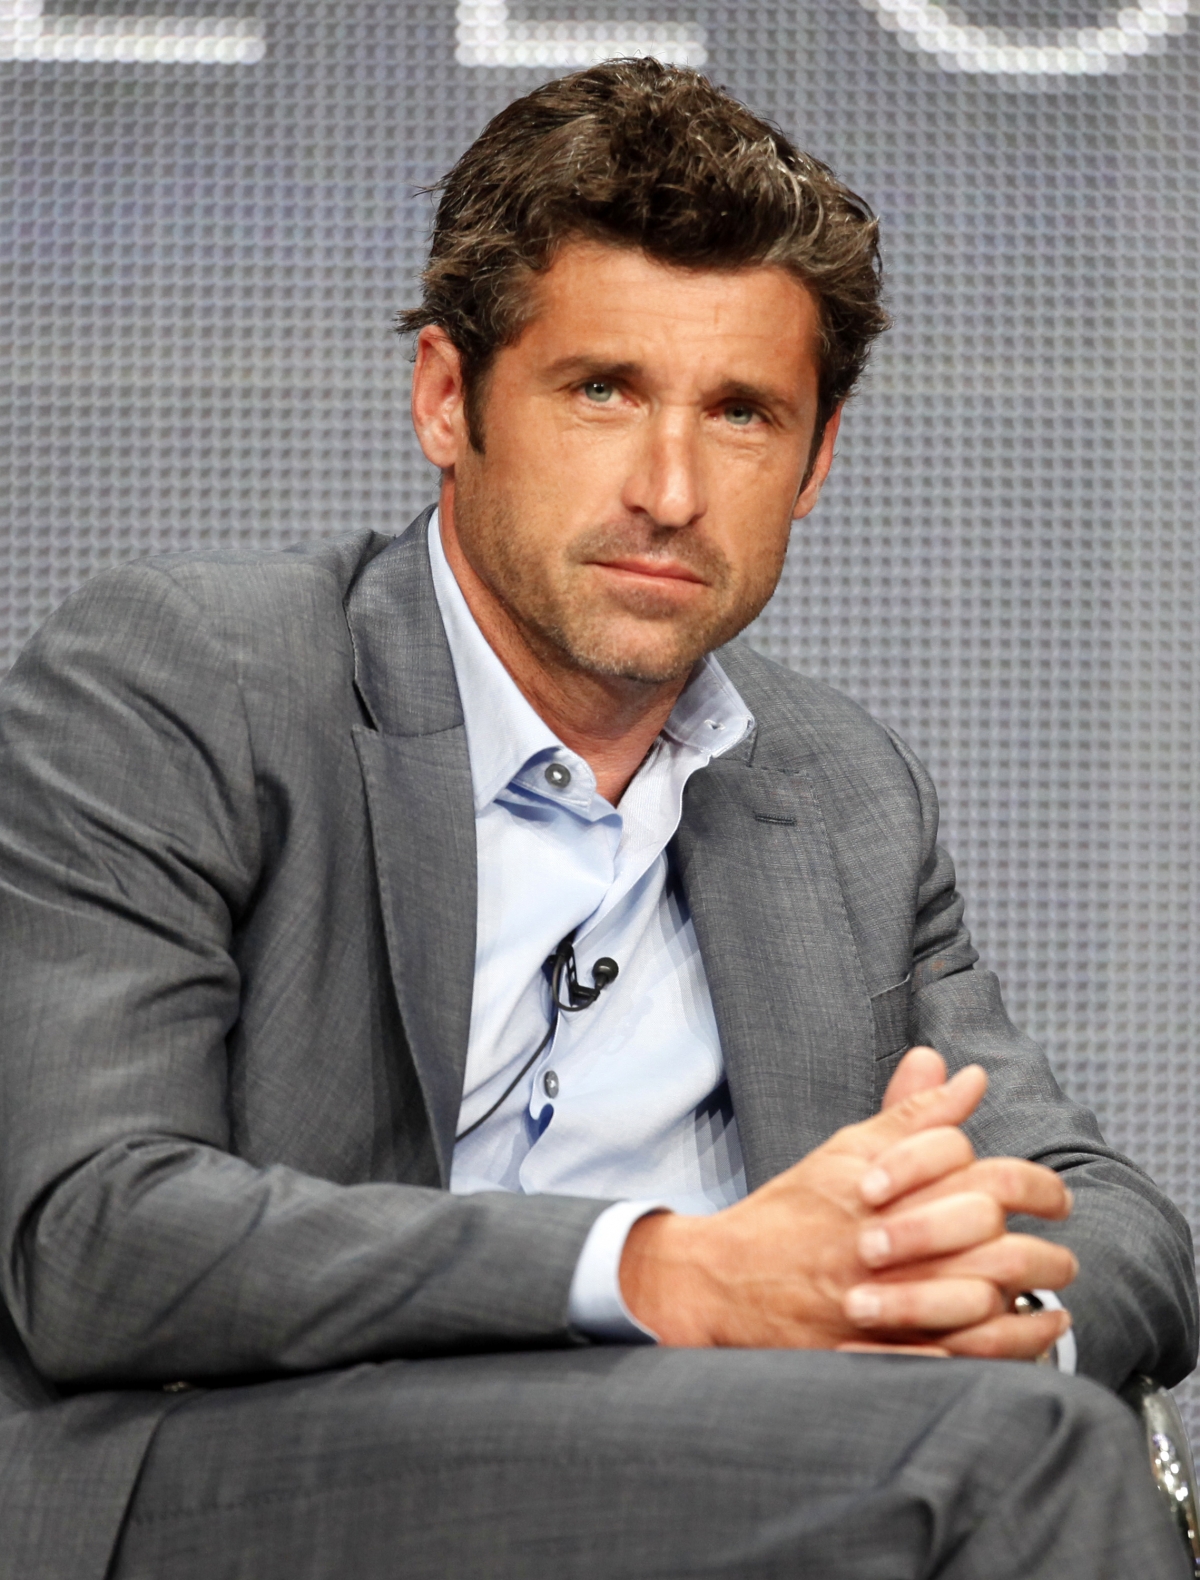 Patrick Dempsey Cheating Scandal New Details about 'Grey's Anatomy